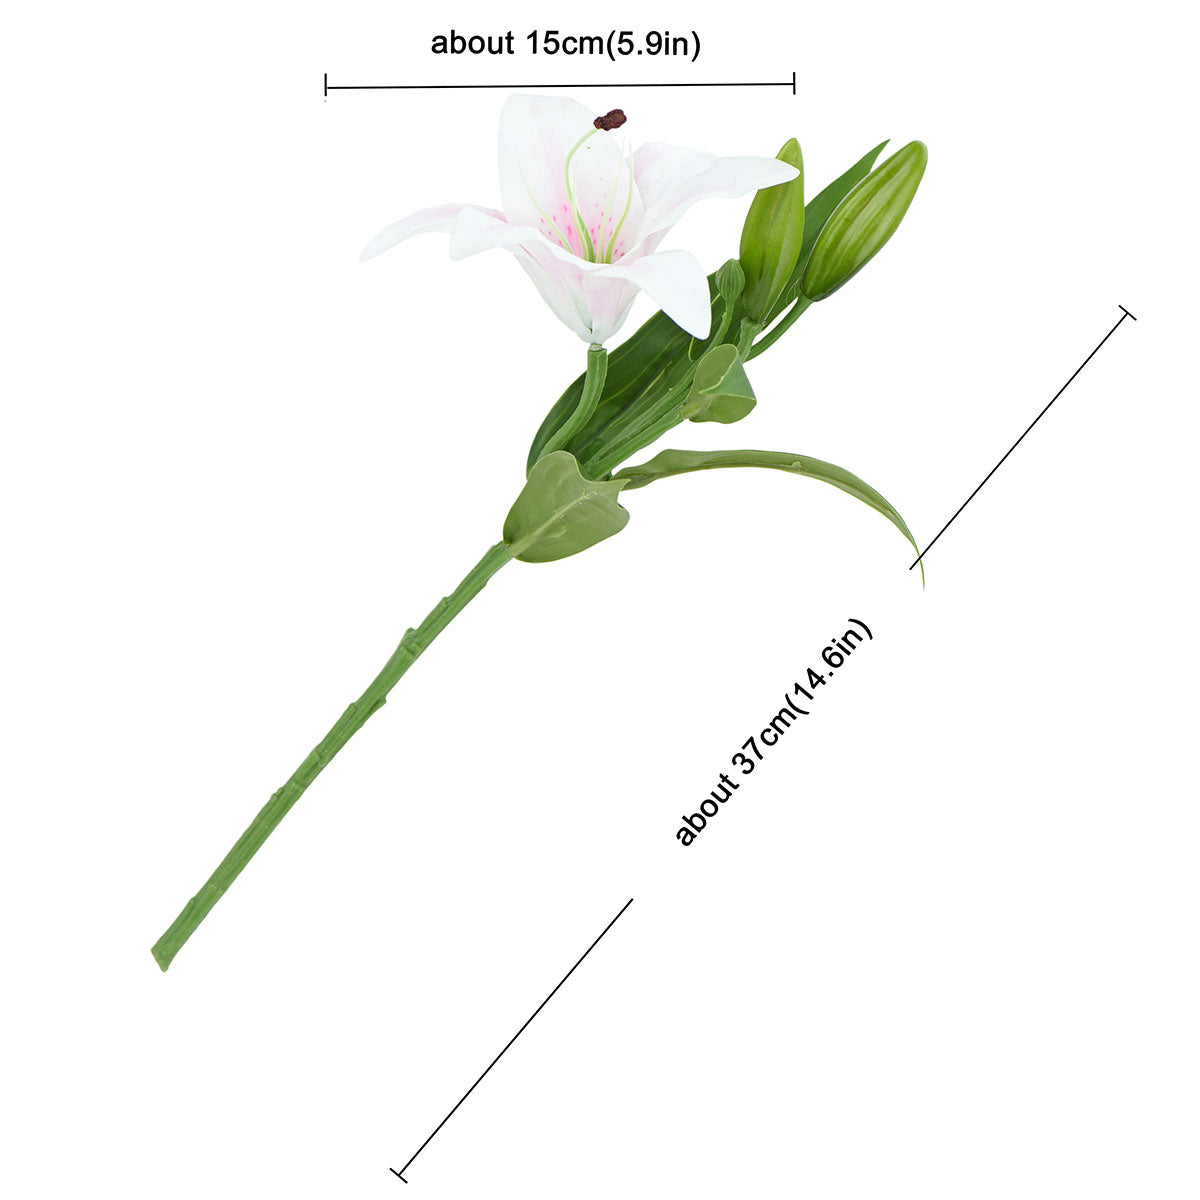 Real Touch™ White Artificial Lily Floral Stems, Set of 6 -38